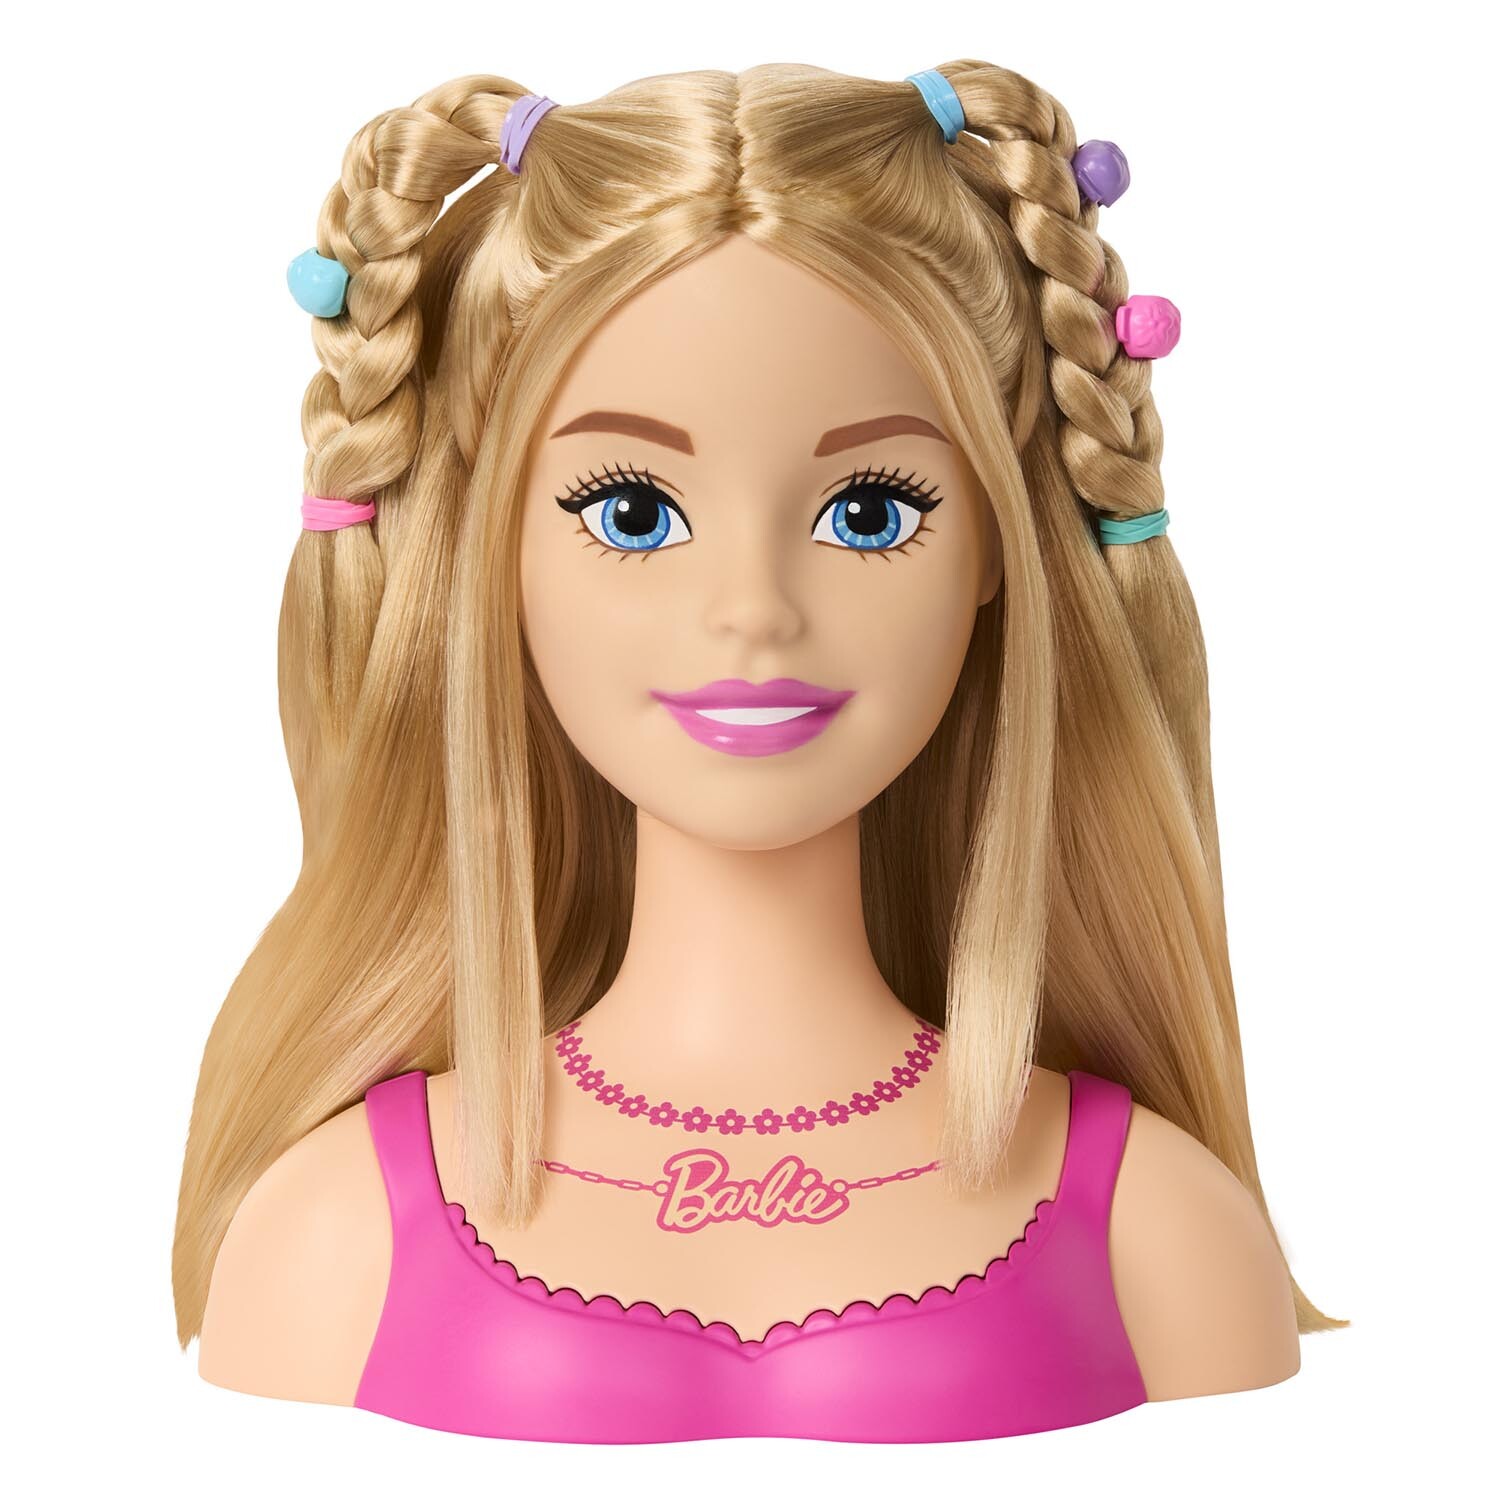 Barbie Styling Head and Accessories - Pink Image 8